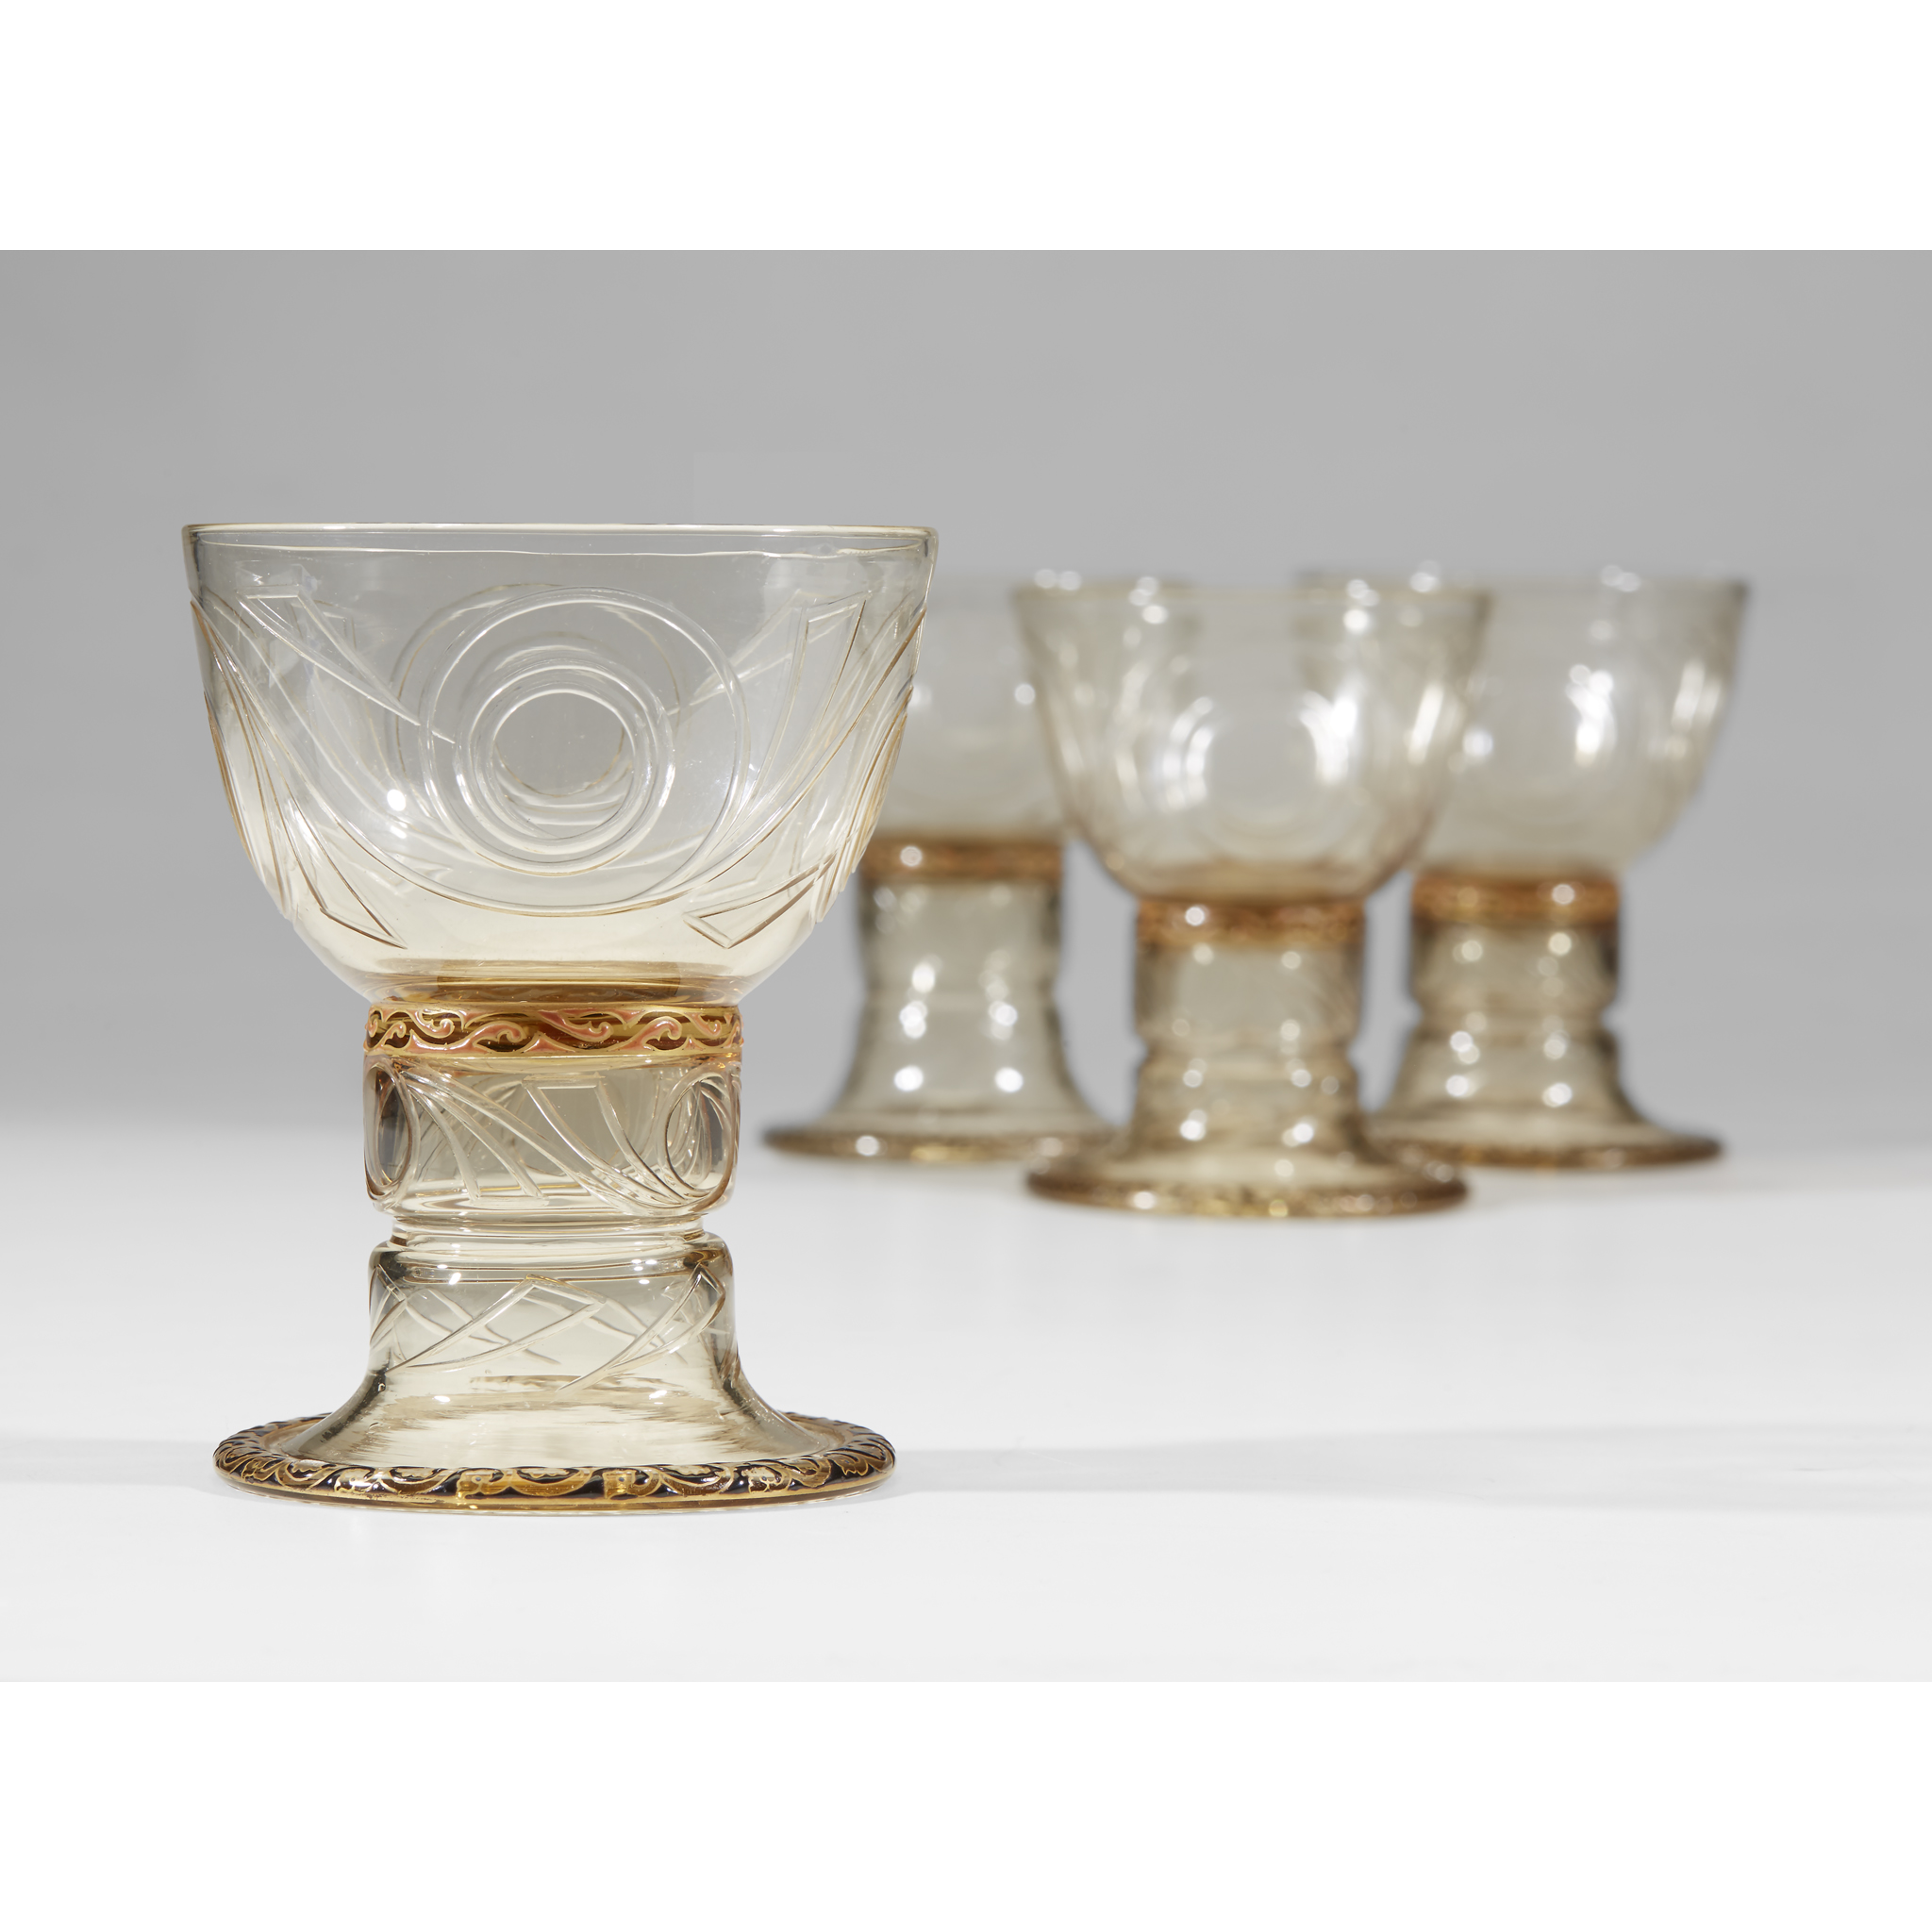 Émile Gallé (French, 1846-1904)A Set of Twelve Drinking Glasses, France, circa 1895 Engraved, - Image 2 of 2